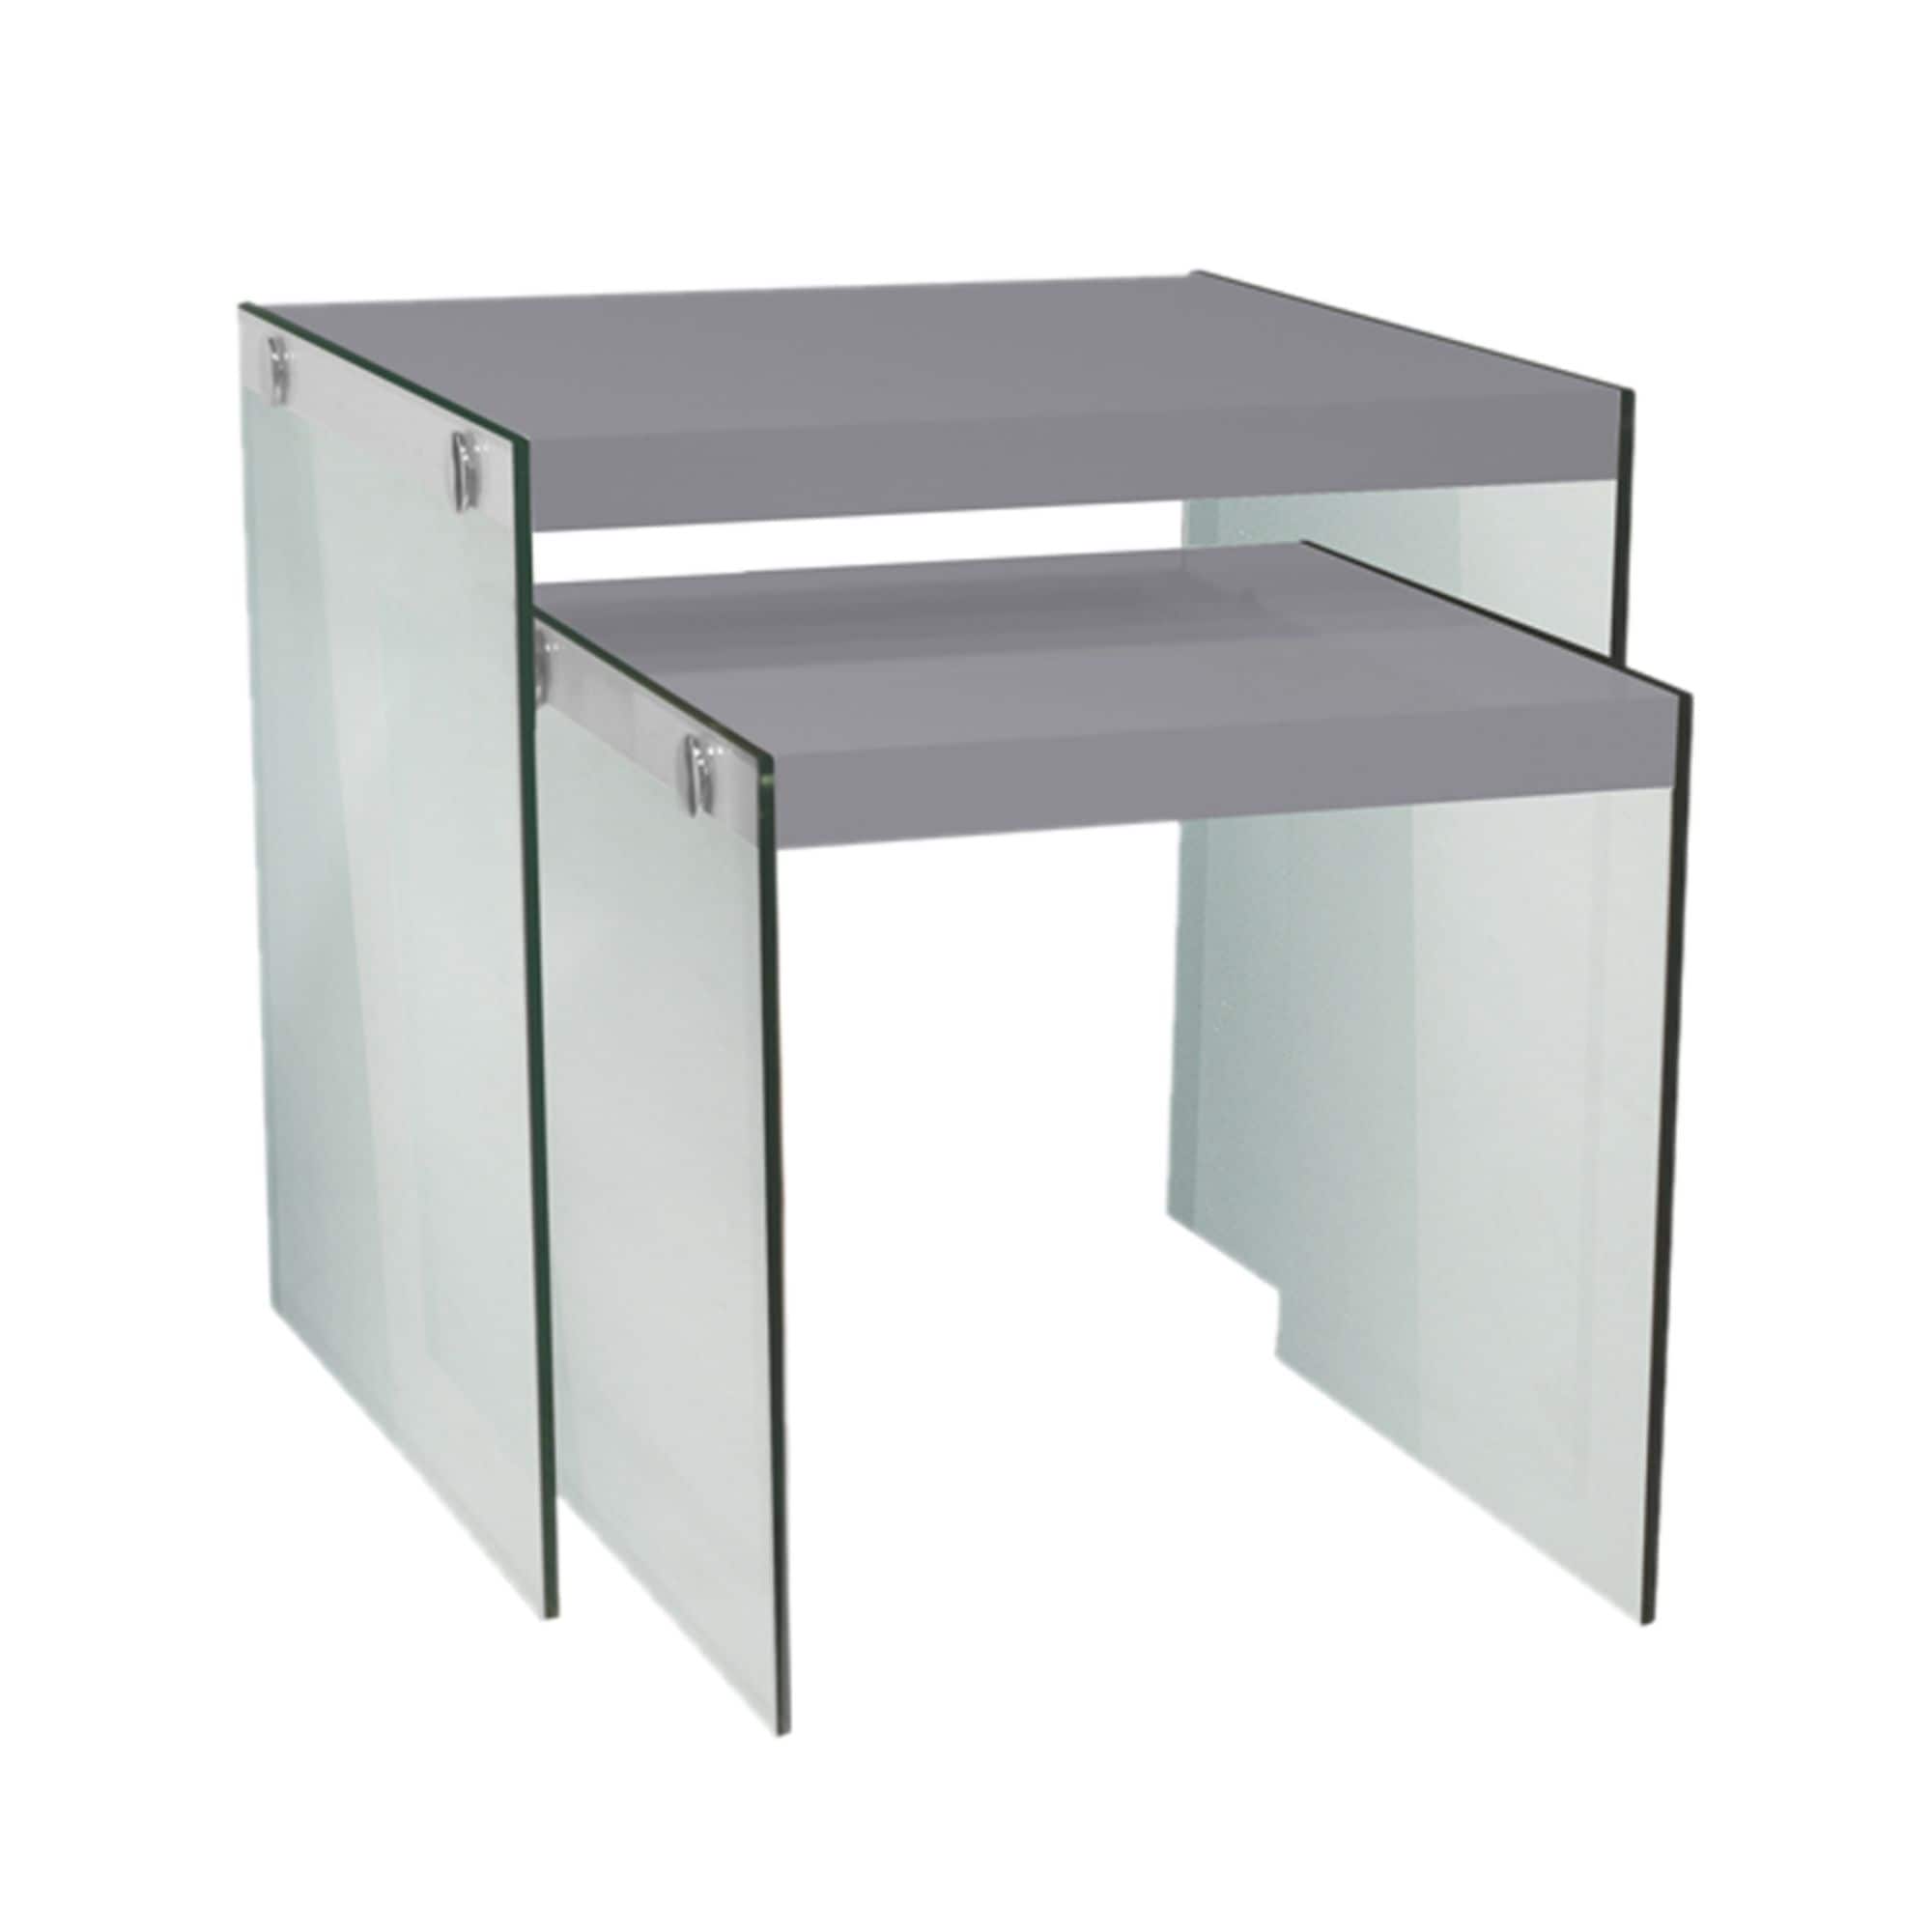 Offex Nesting Table 2 Piece Set - Glossy White Tempered Glass